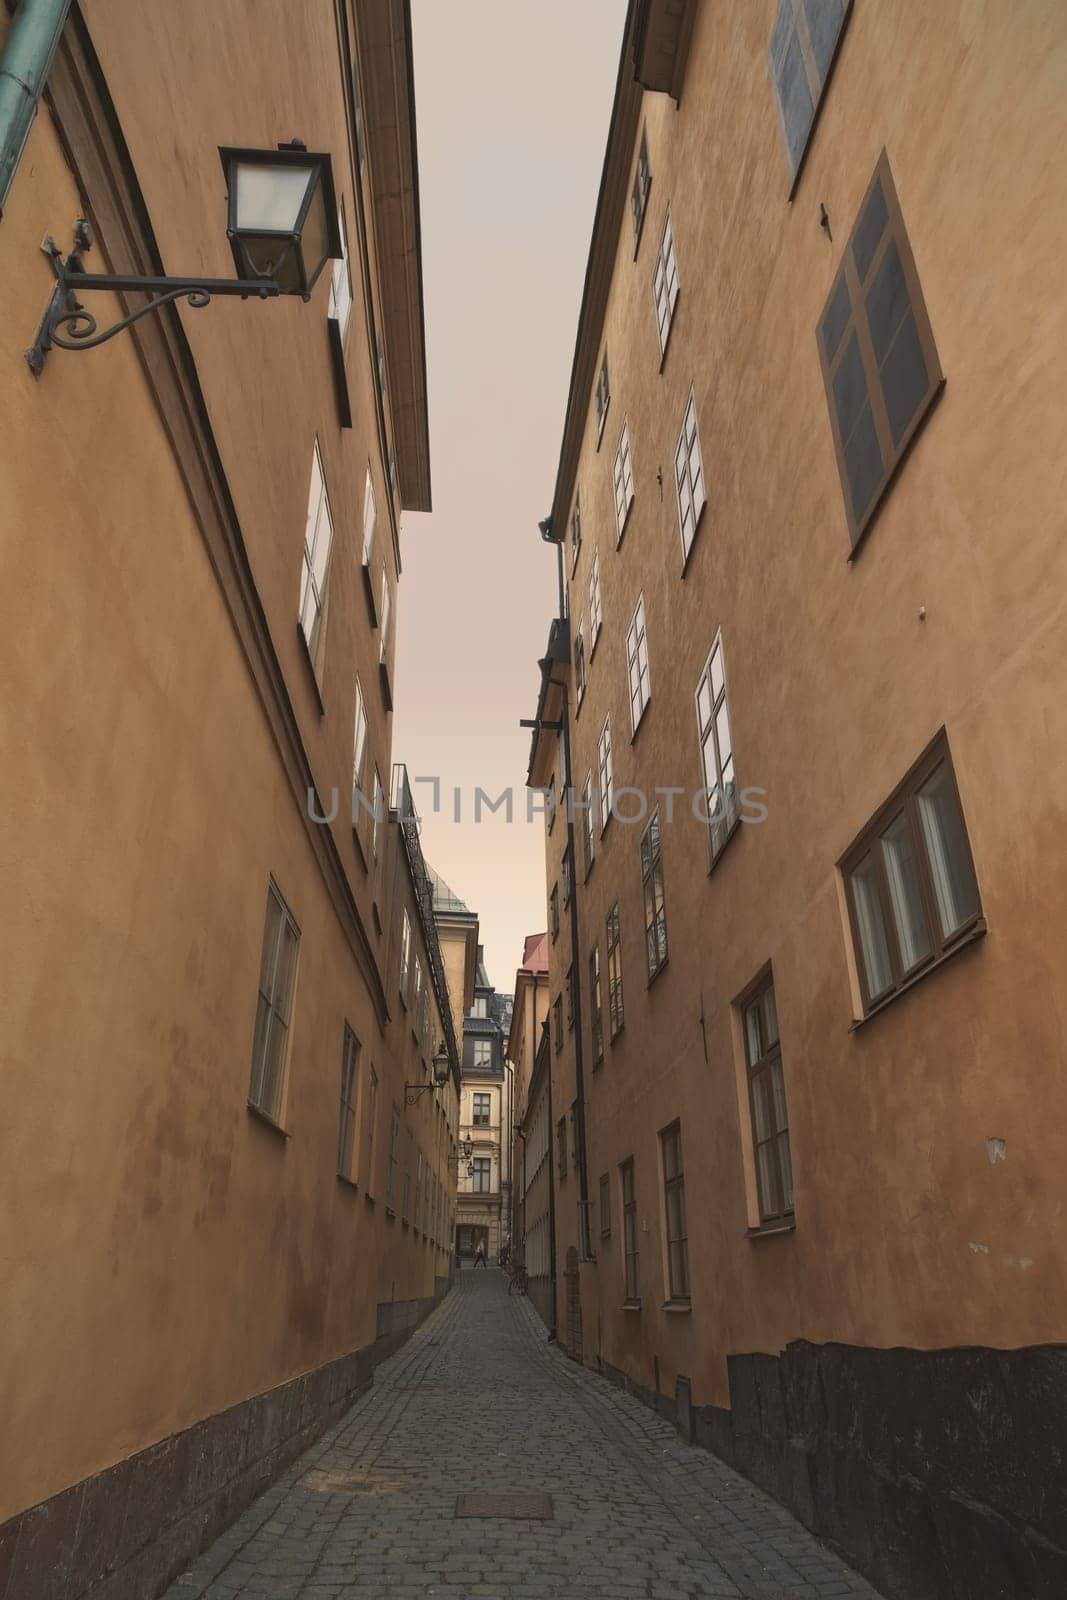 Travel, architecture and alley of vintage buildings in old town with history, culture and calm holiday destination. Vacation, landmark and quiet street in Sweden with retro apartment in ancient city